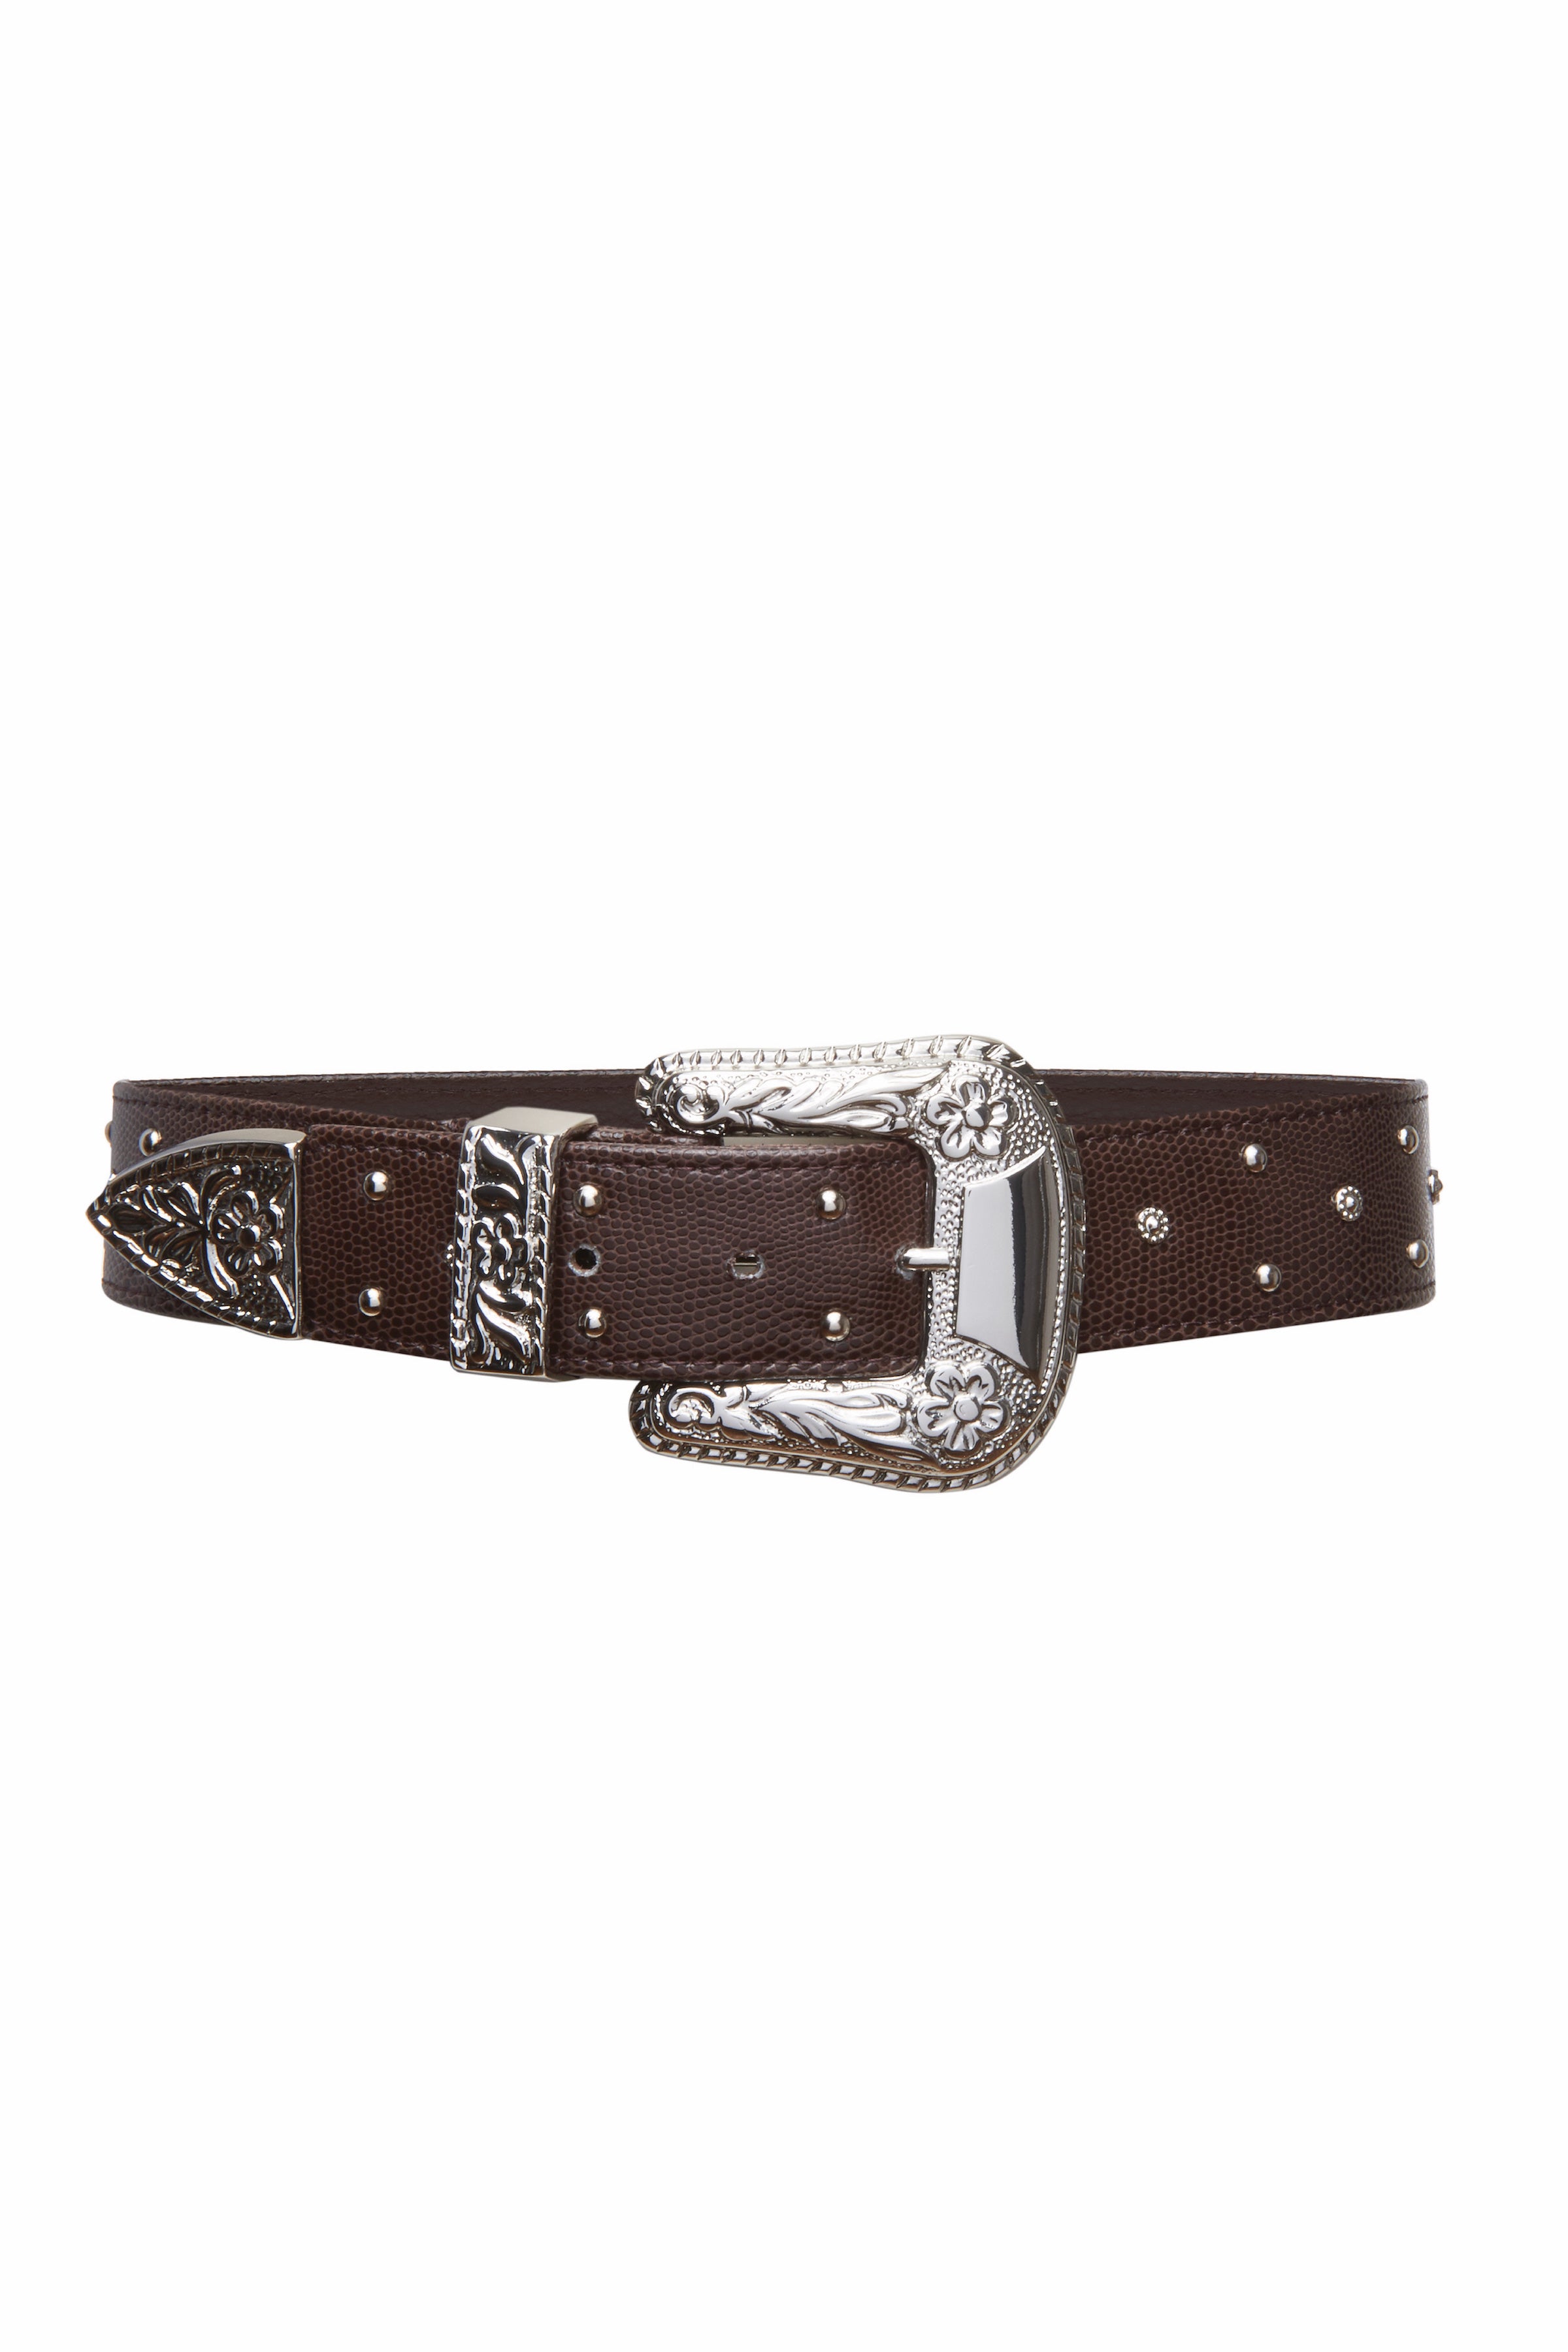 Serendipity Brown Leather Belt with Engraved Silver Buckle and Studs